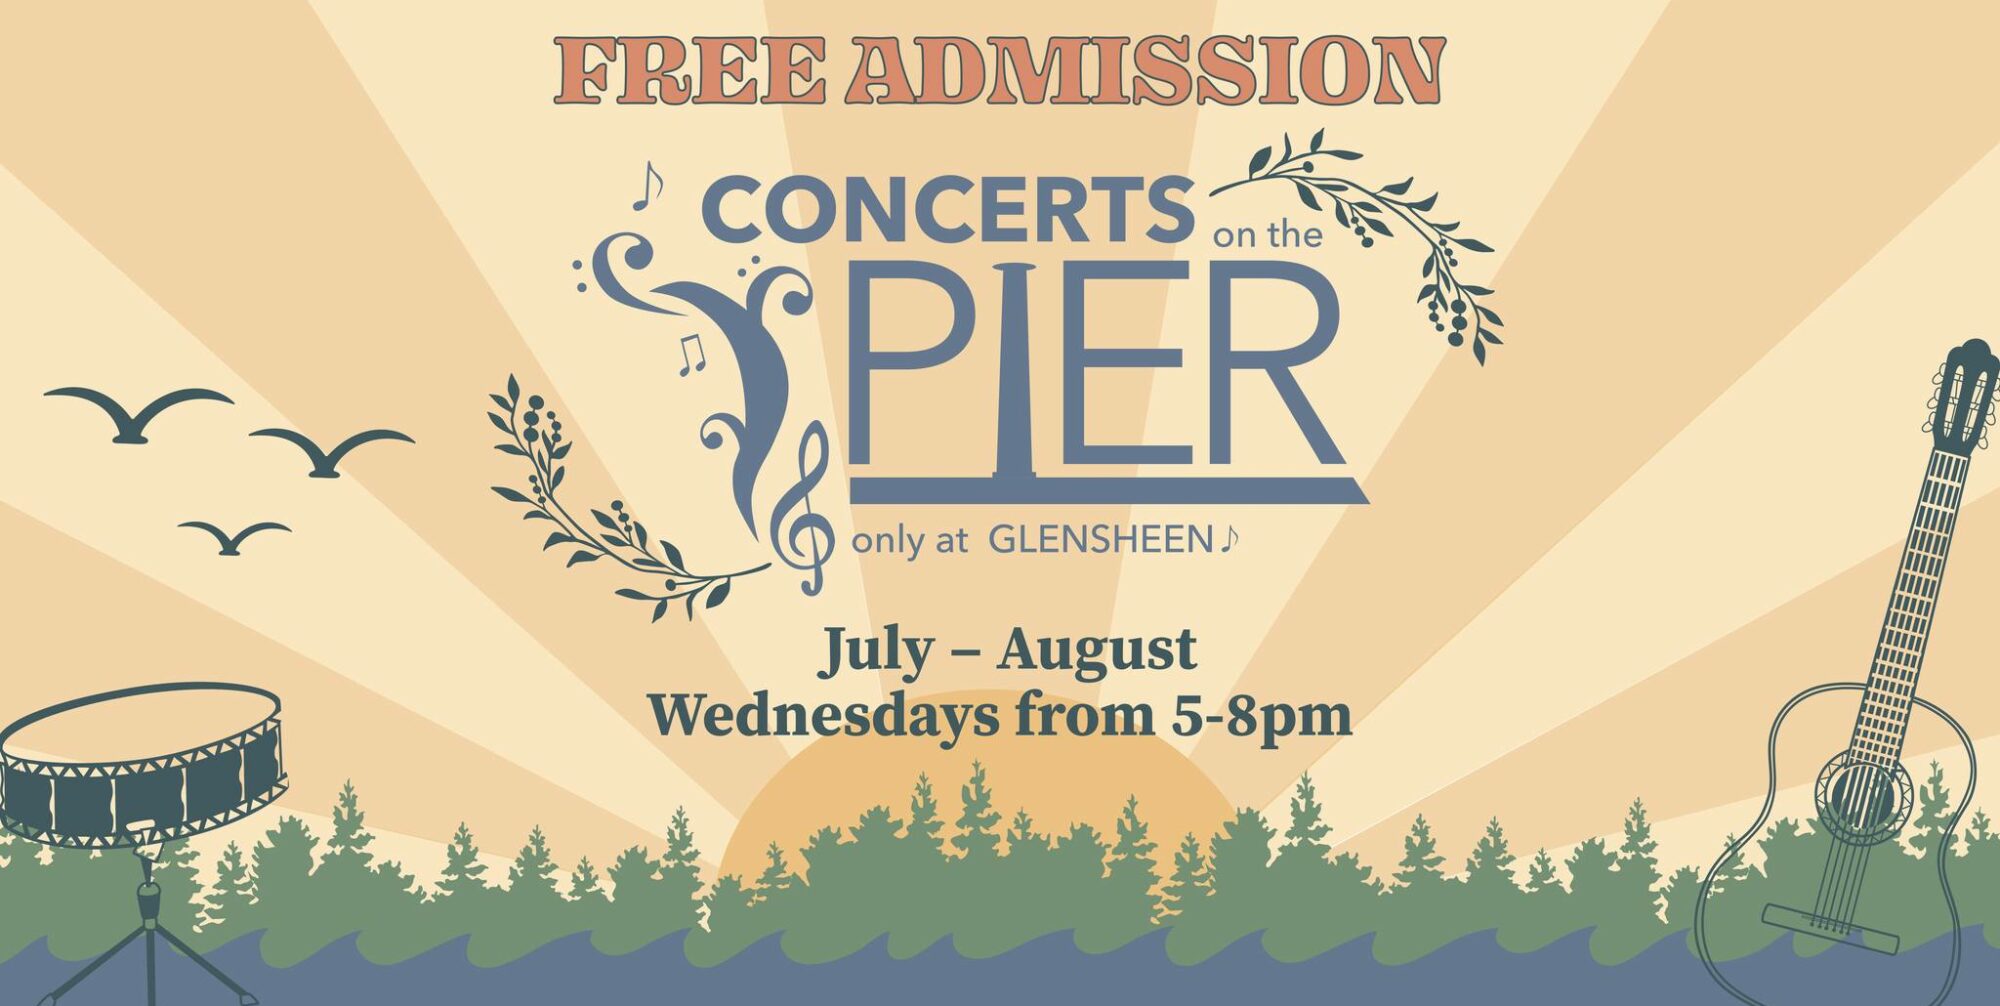 A sun rising with the text Concerts on the Pier only at Glensheen, Free Admission, July-August, Wednesdays 5pm-8pm. Instruments and a landscape are in the foreground.